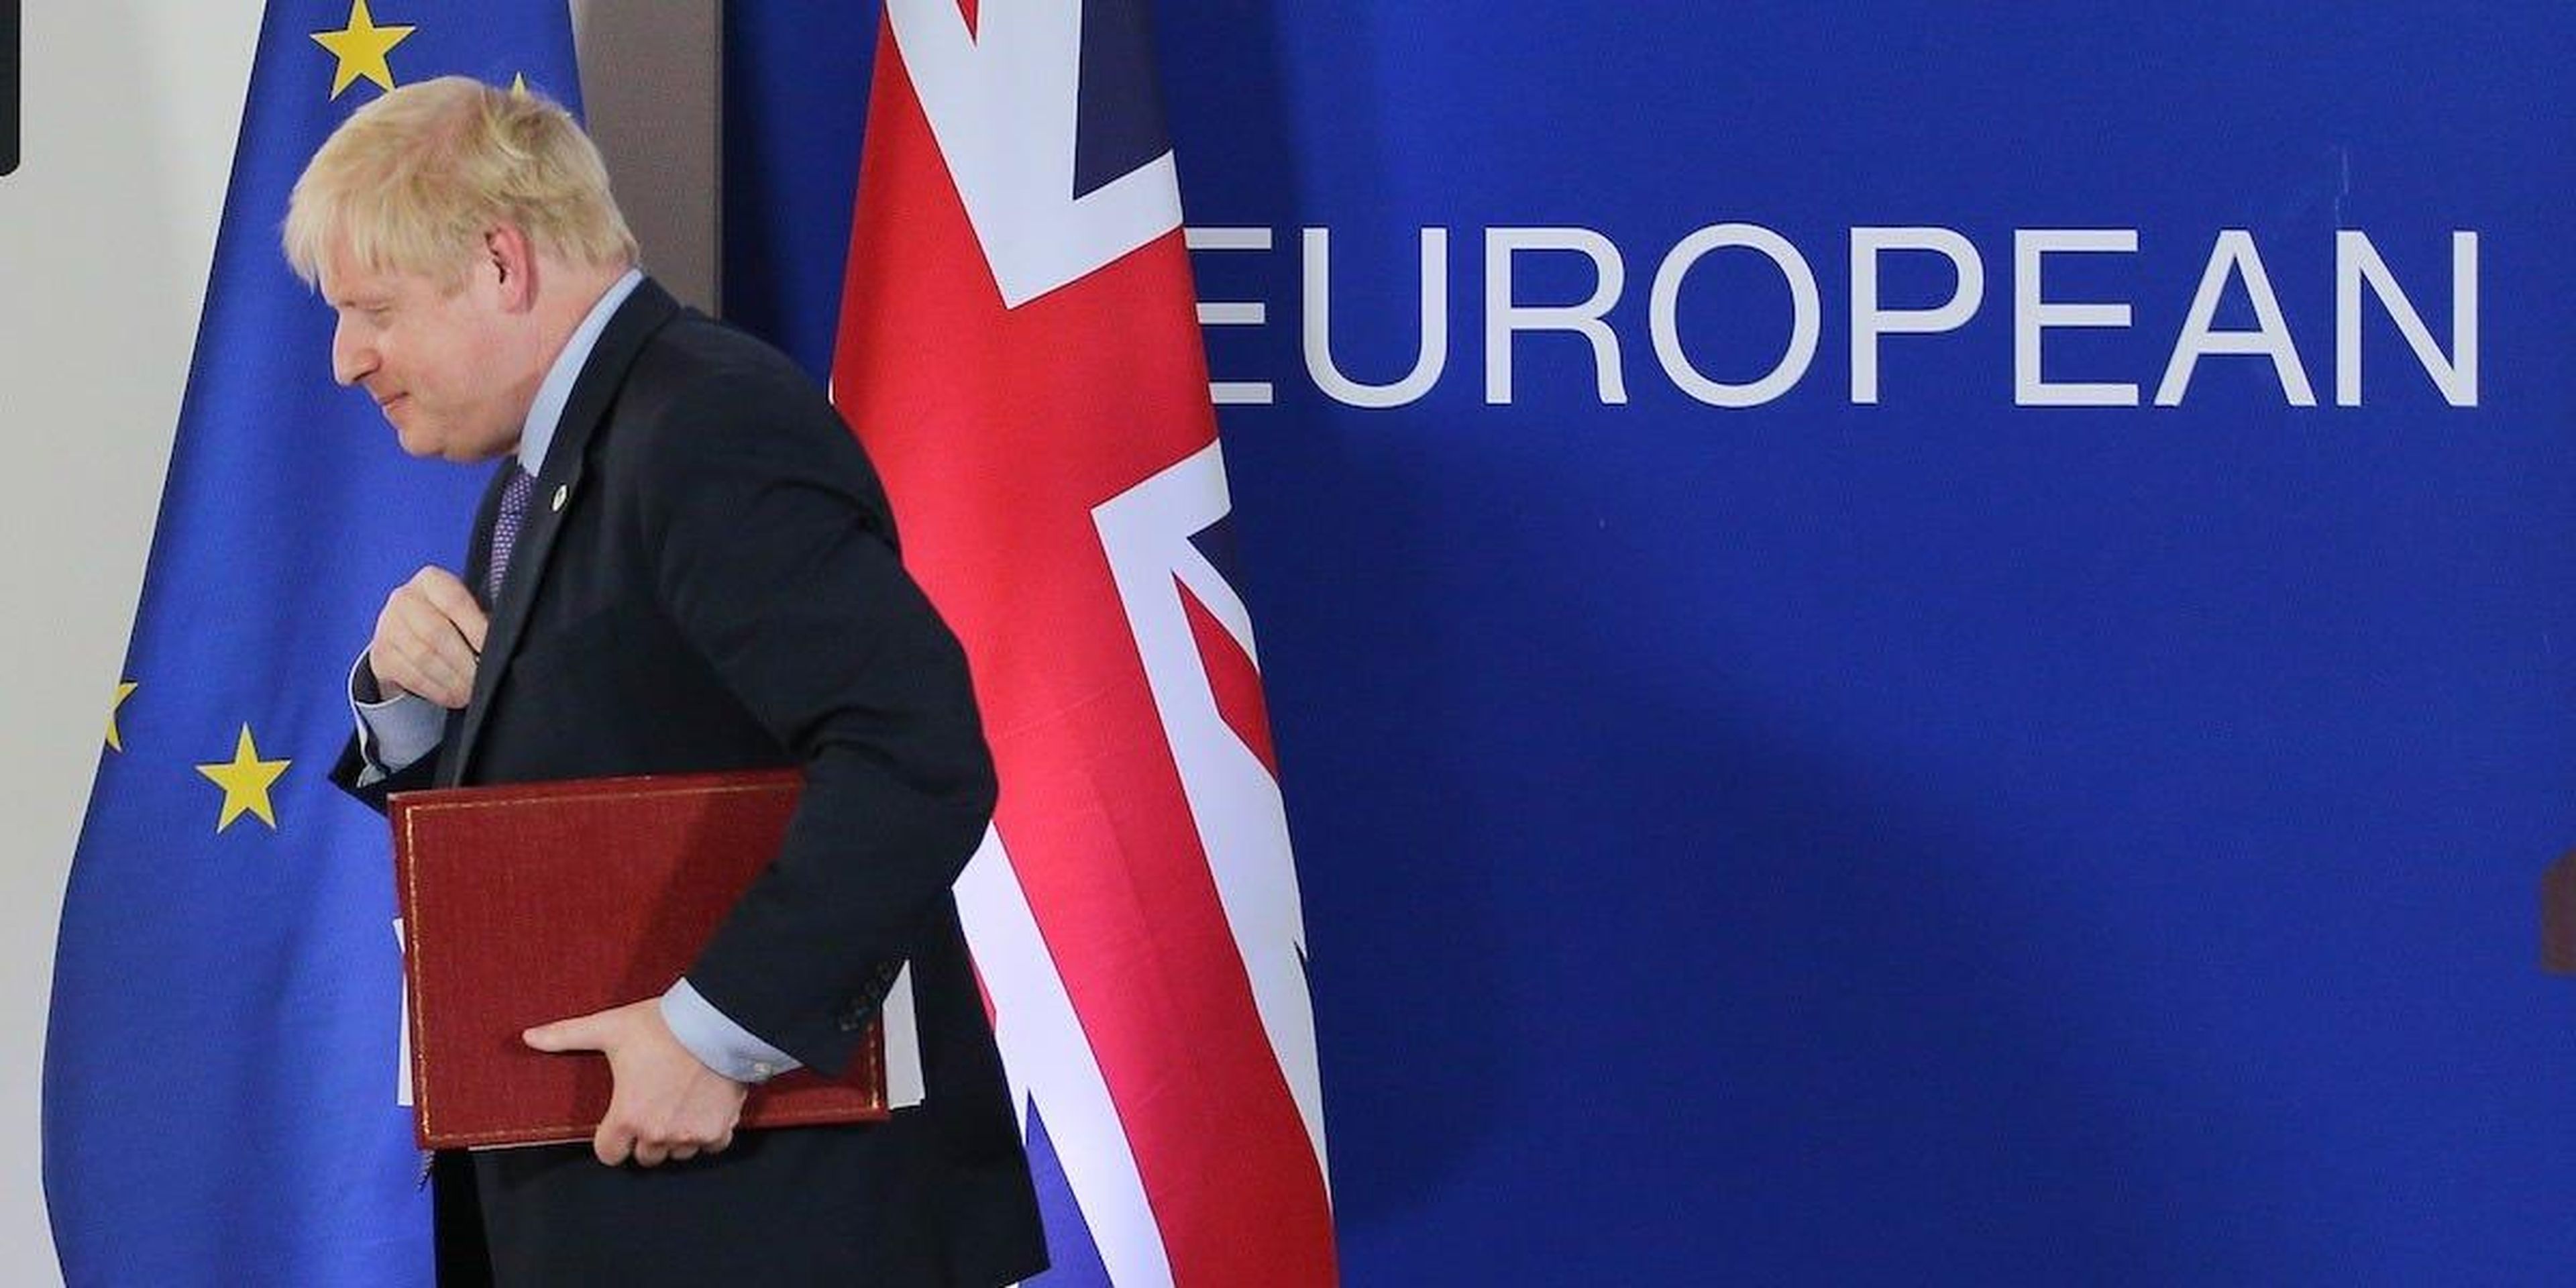 The EU is beginning to believe the UK actually wants the Brexit trade deal talks to fail